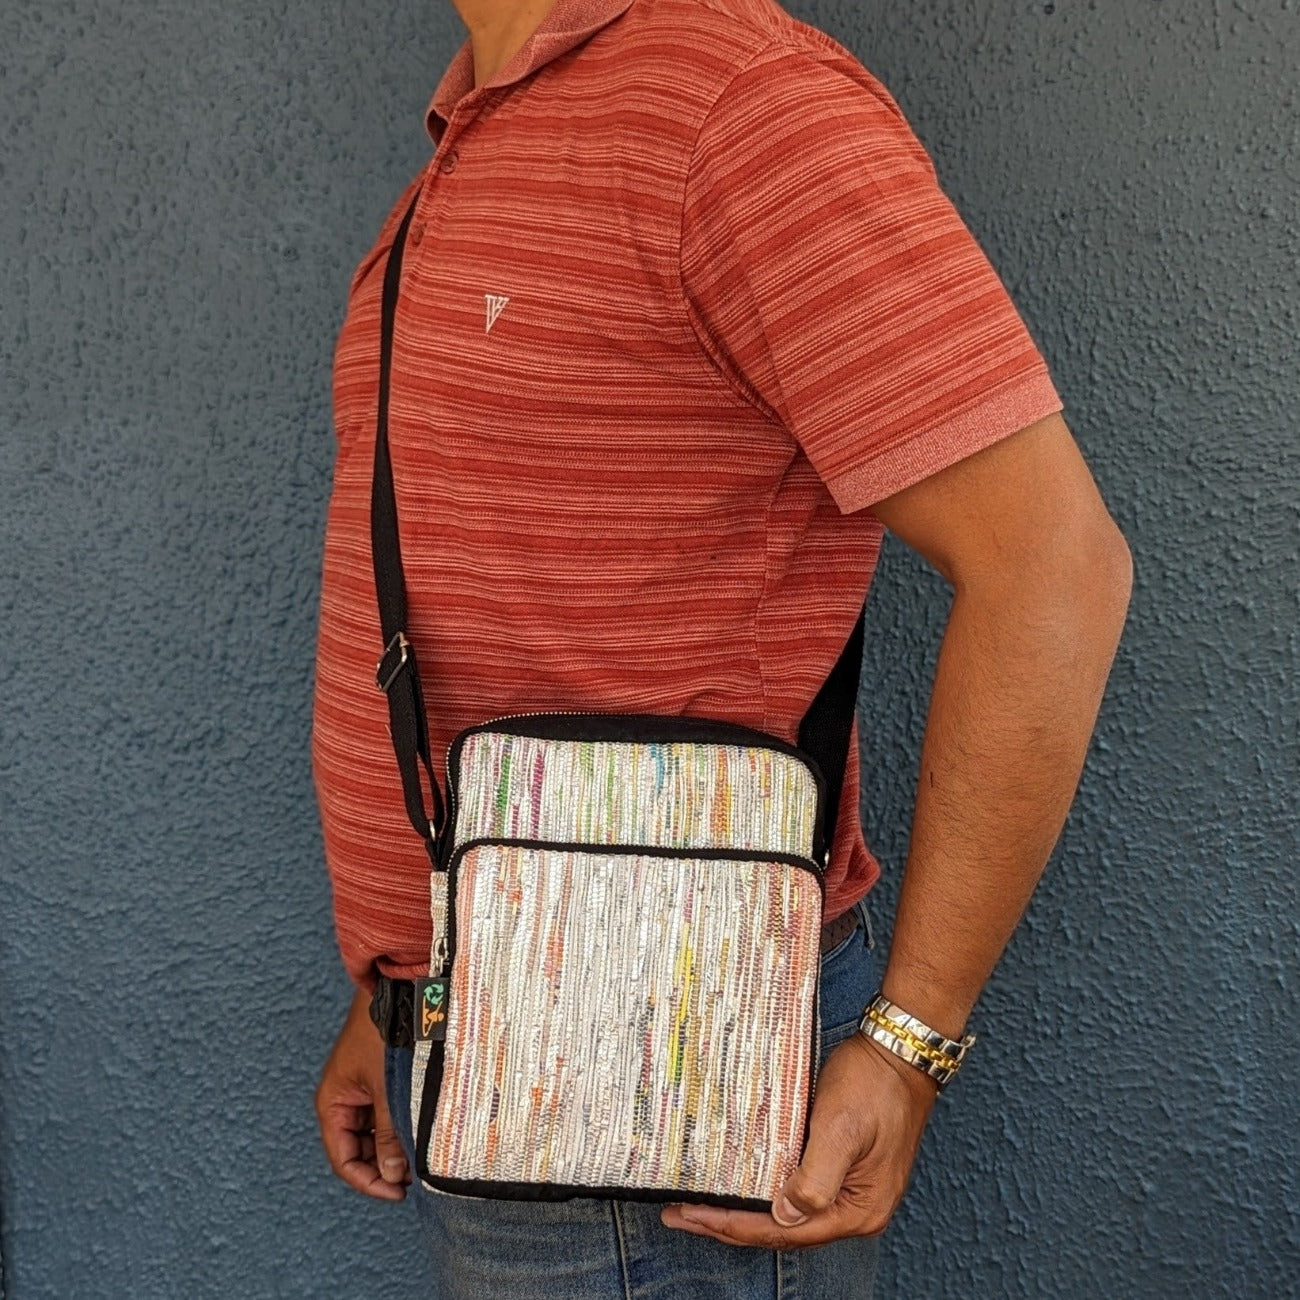 Cross Body Sling (CBS0324-118) Multicolored Glittery Waste Plastic Wrappers Upcycled Handwoven